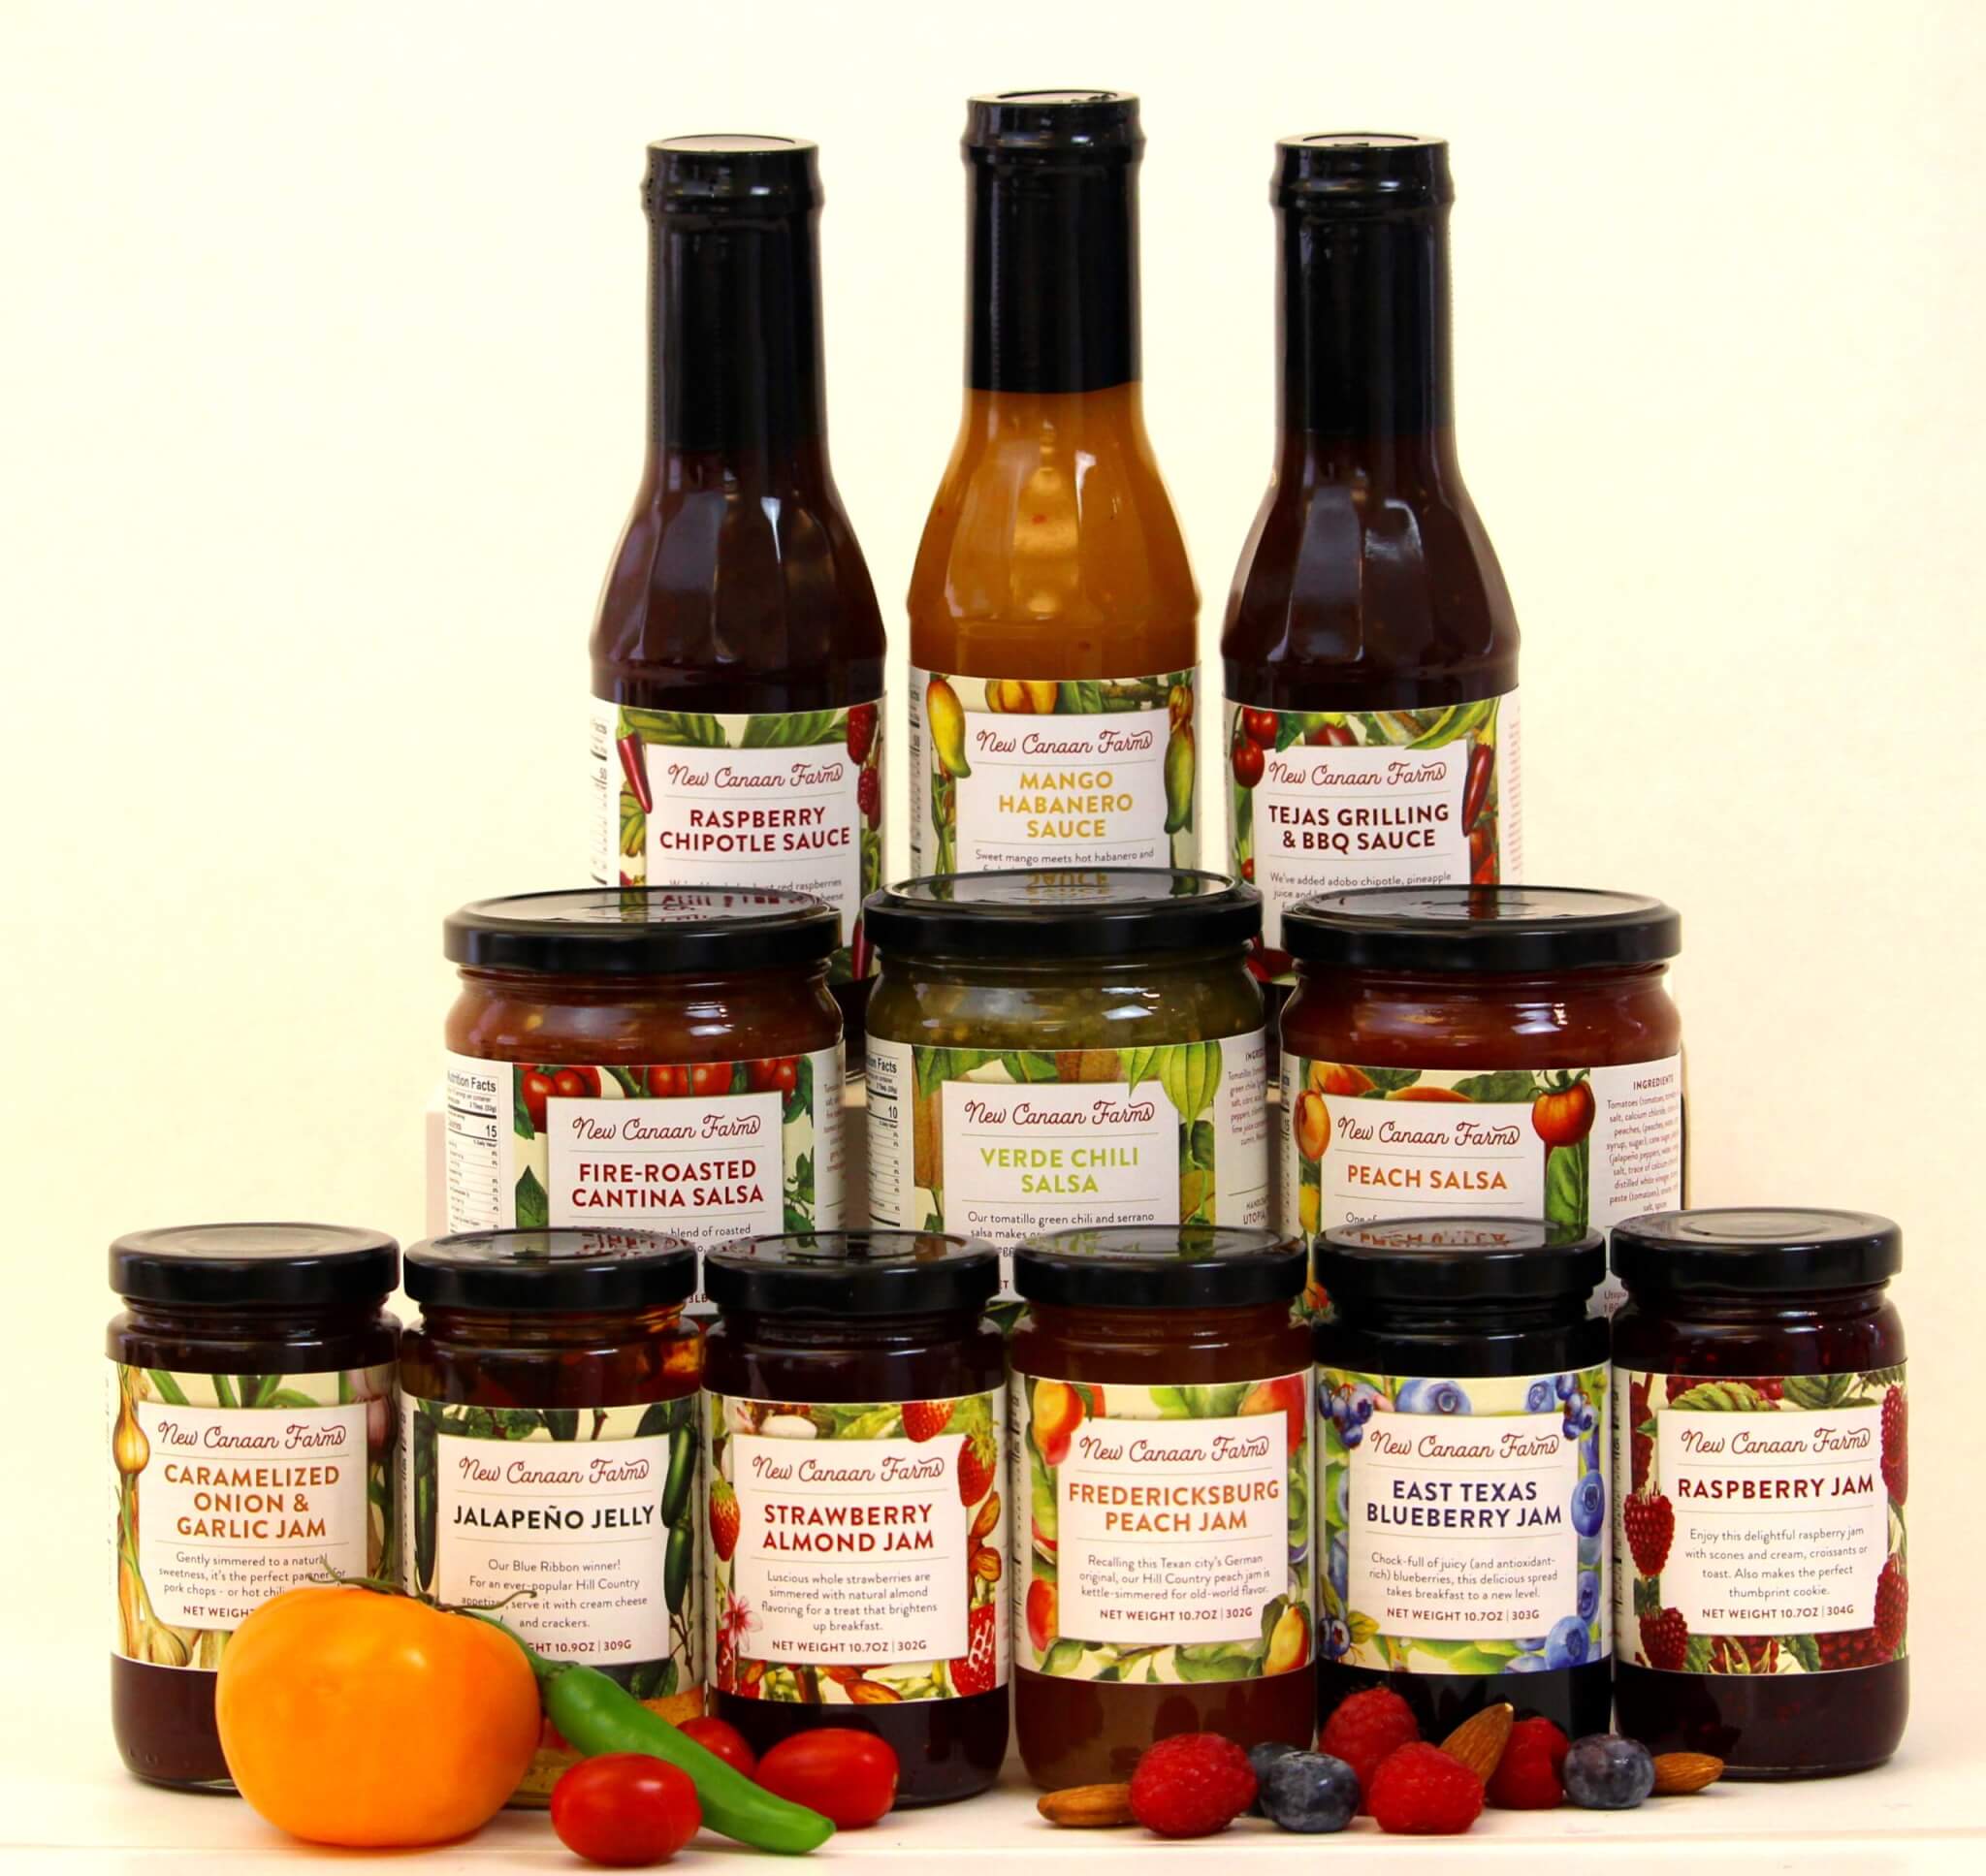 New Canaan Farms newly designed product range